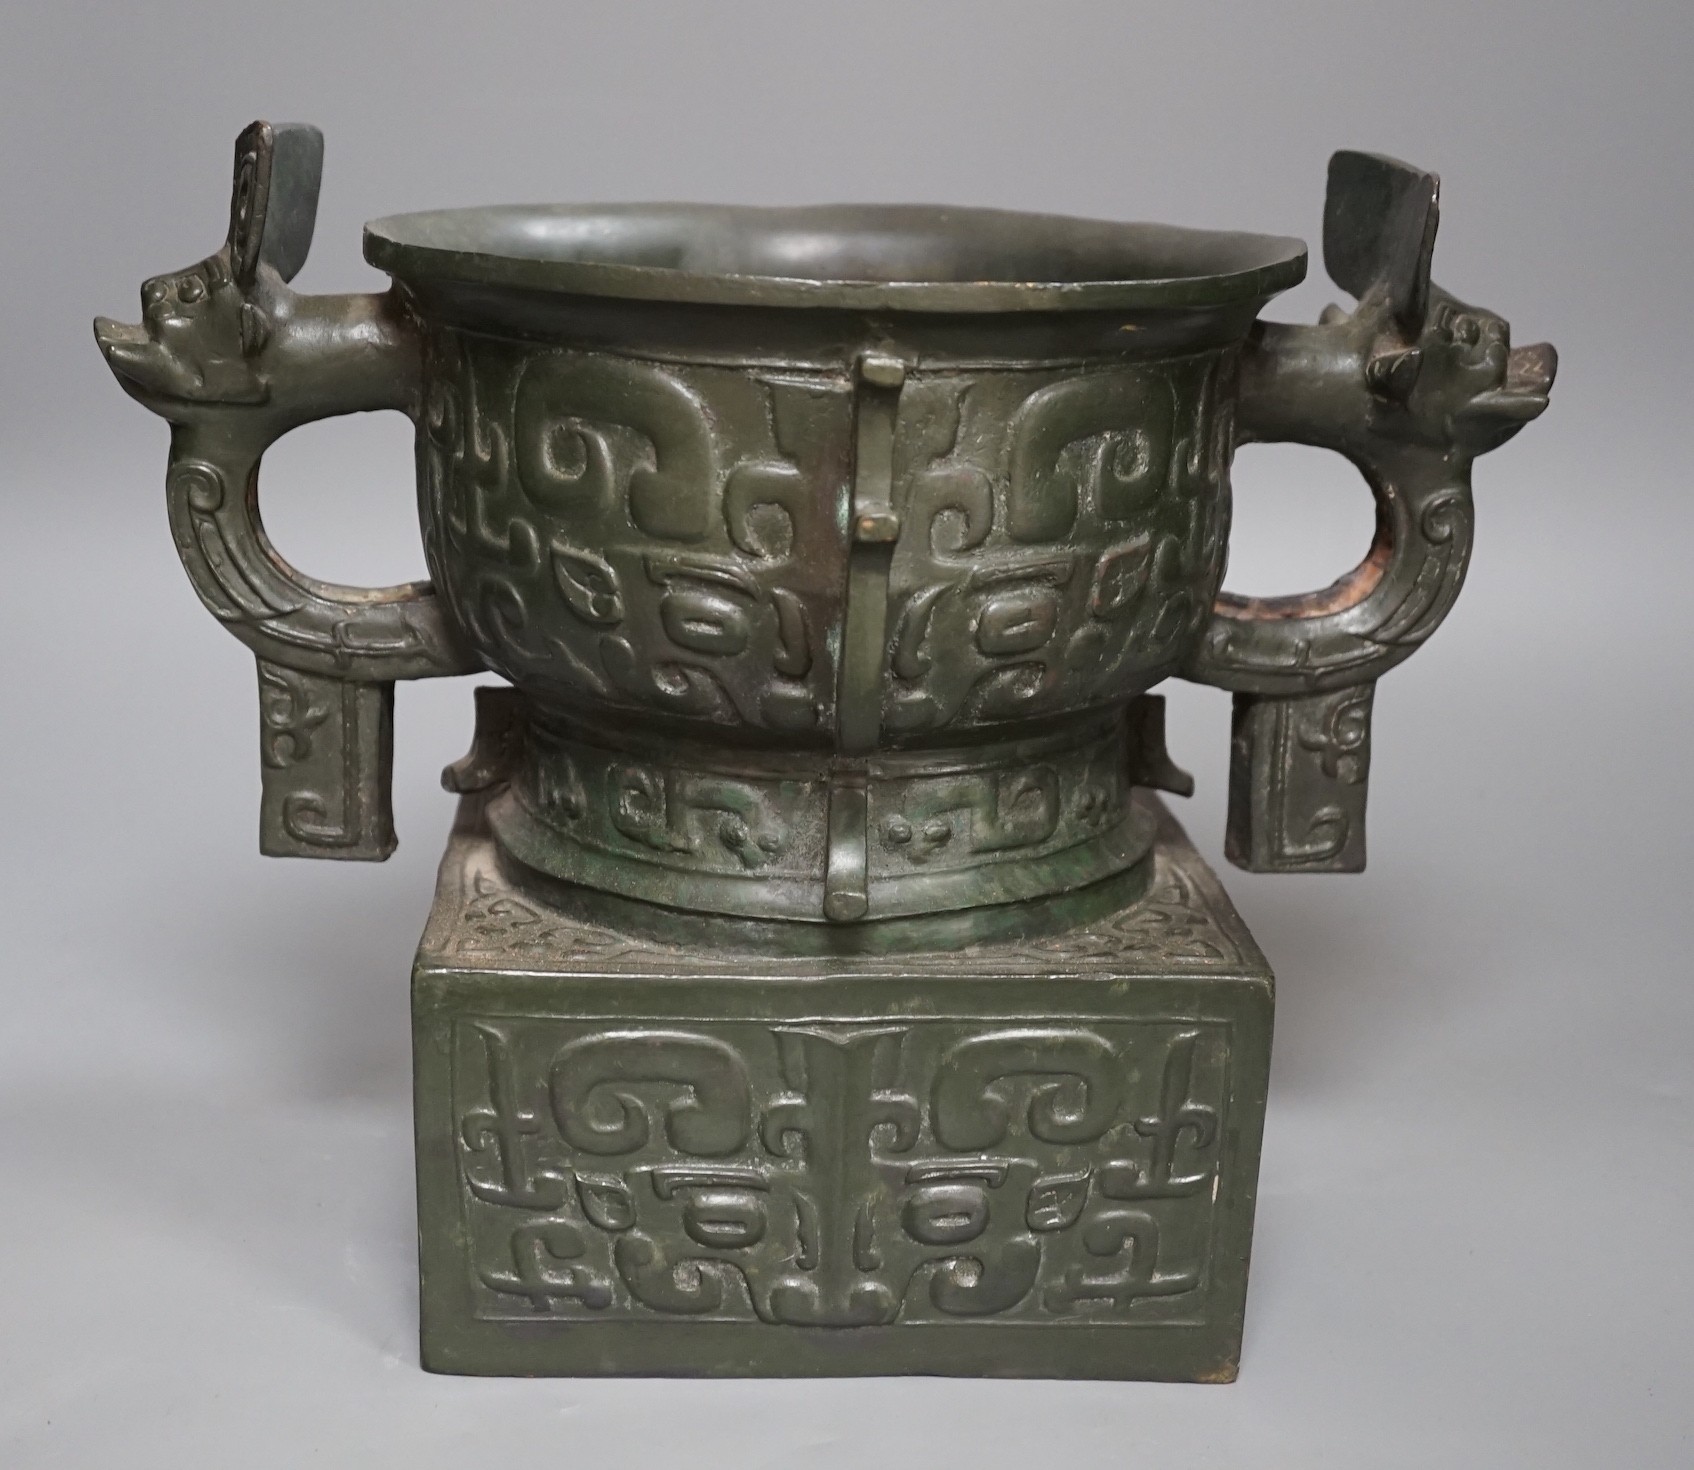 An archaistic Chinese bronze vase after the antique, modelled as an original bronze in the collection of the Palace Museum, Beijing, boxed with certificate, cast number 35. 25.5cm tall